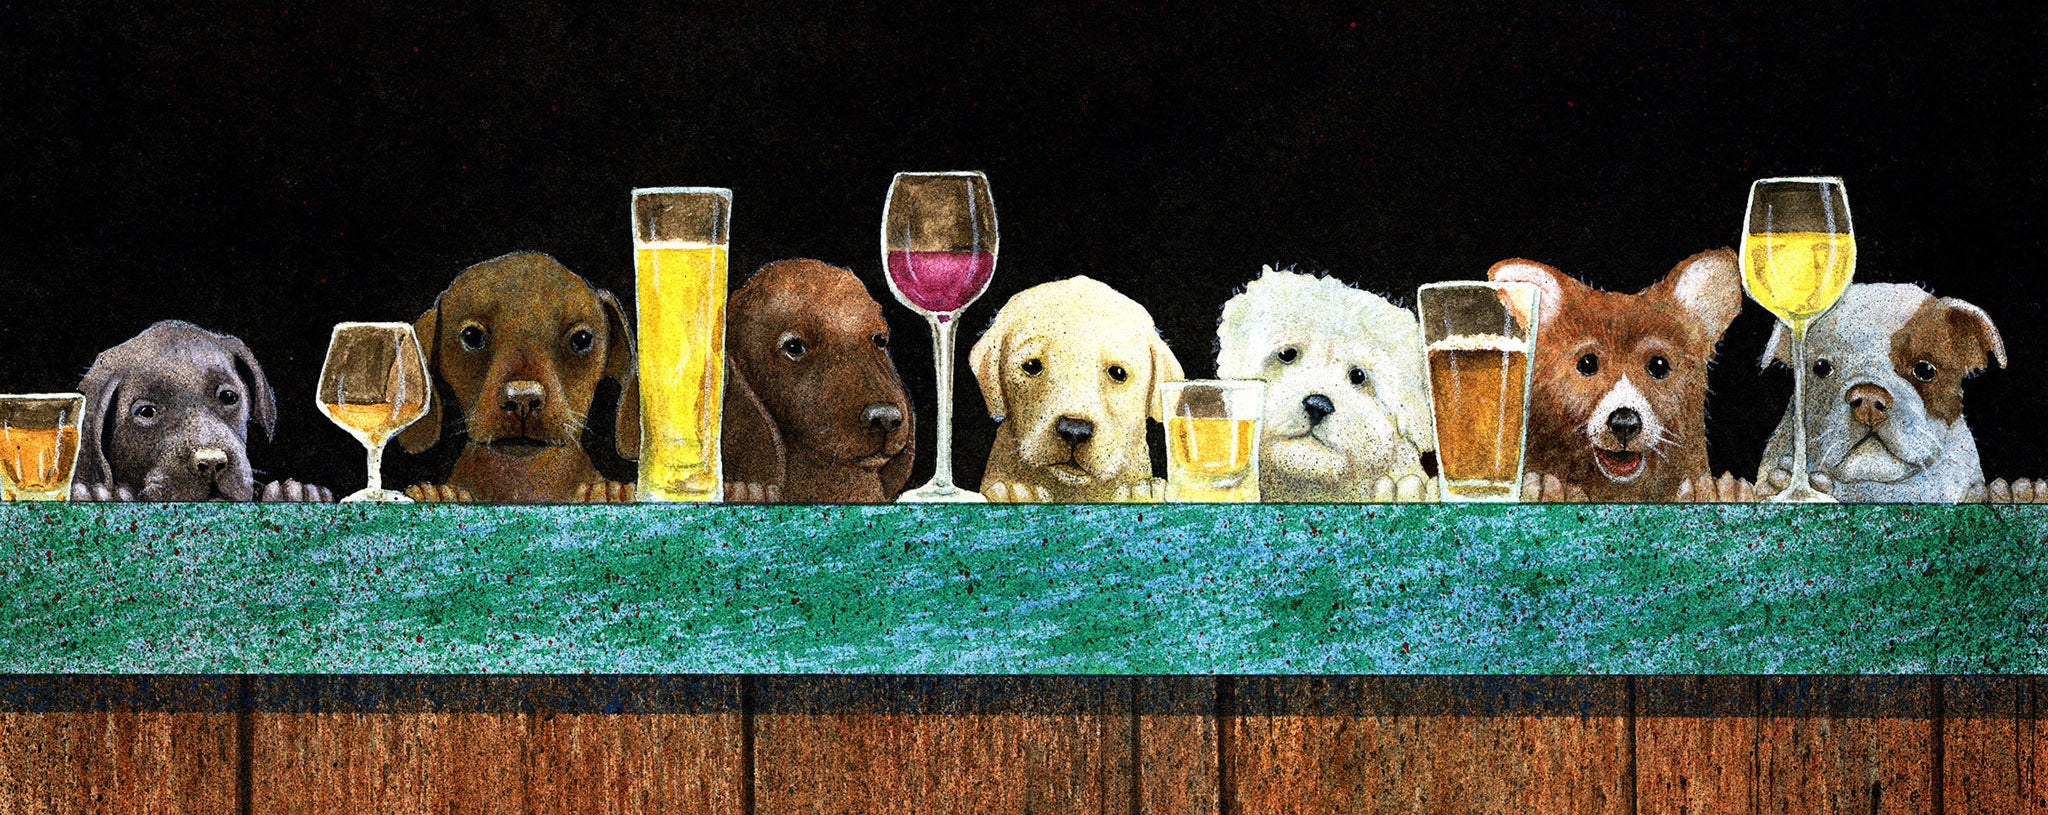 Yappy Hour by Will Bullas on Metal